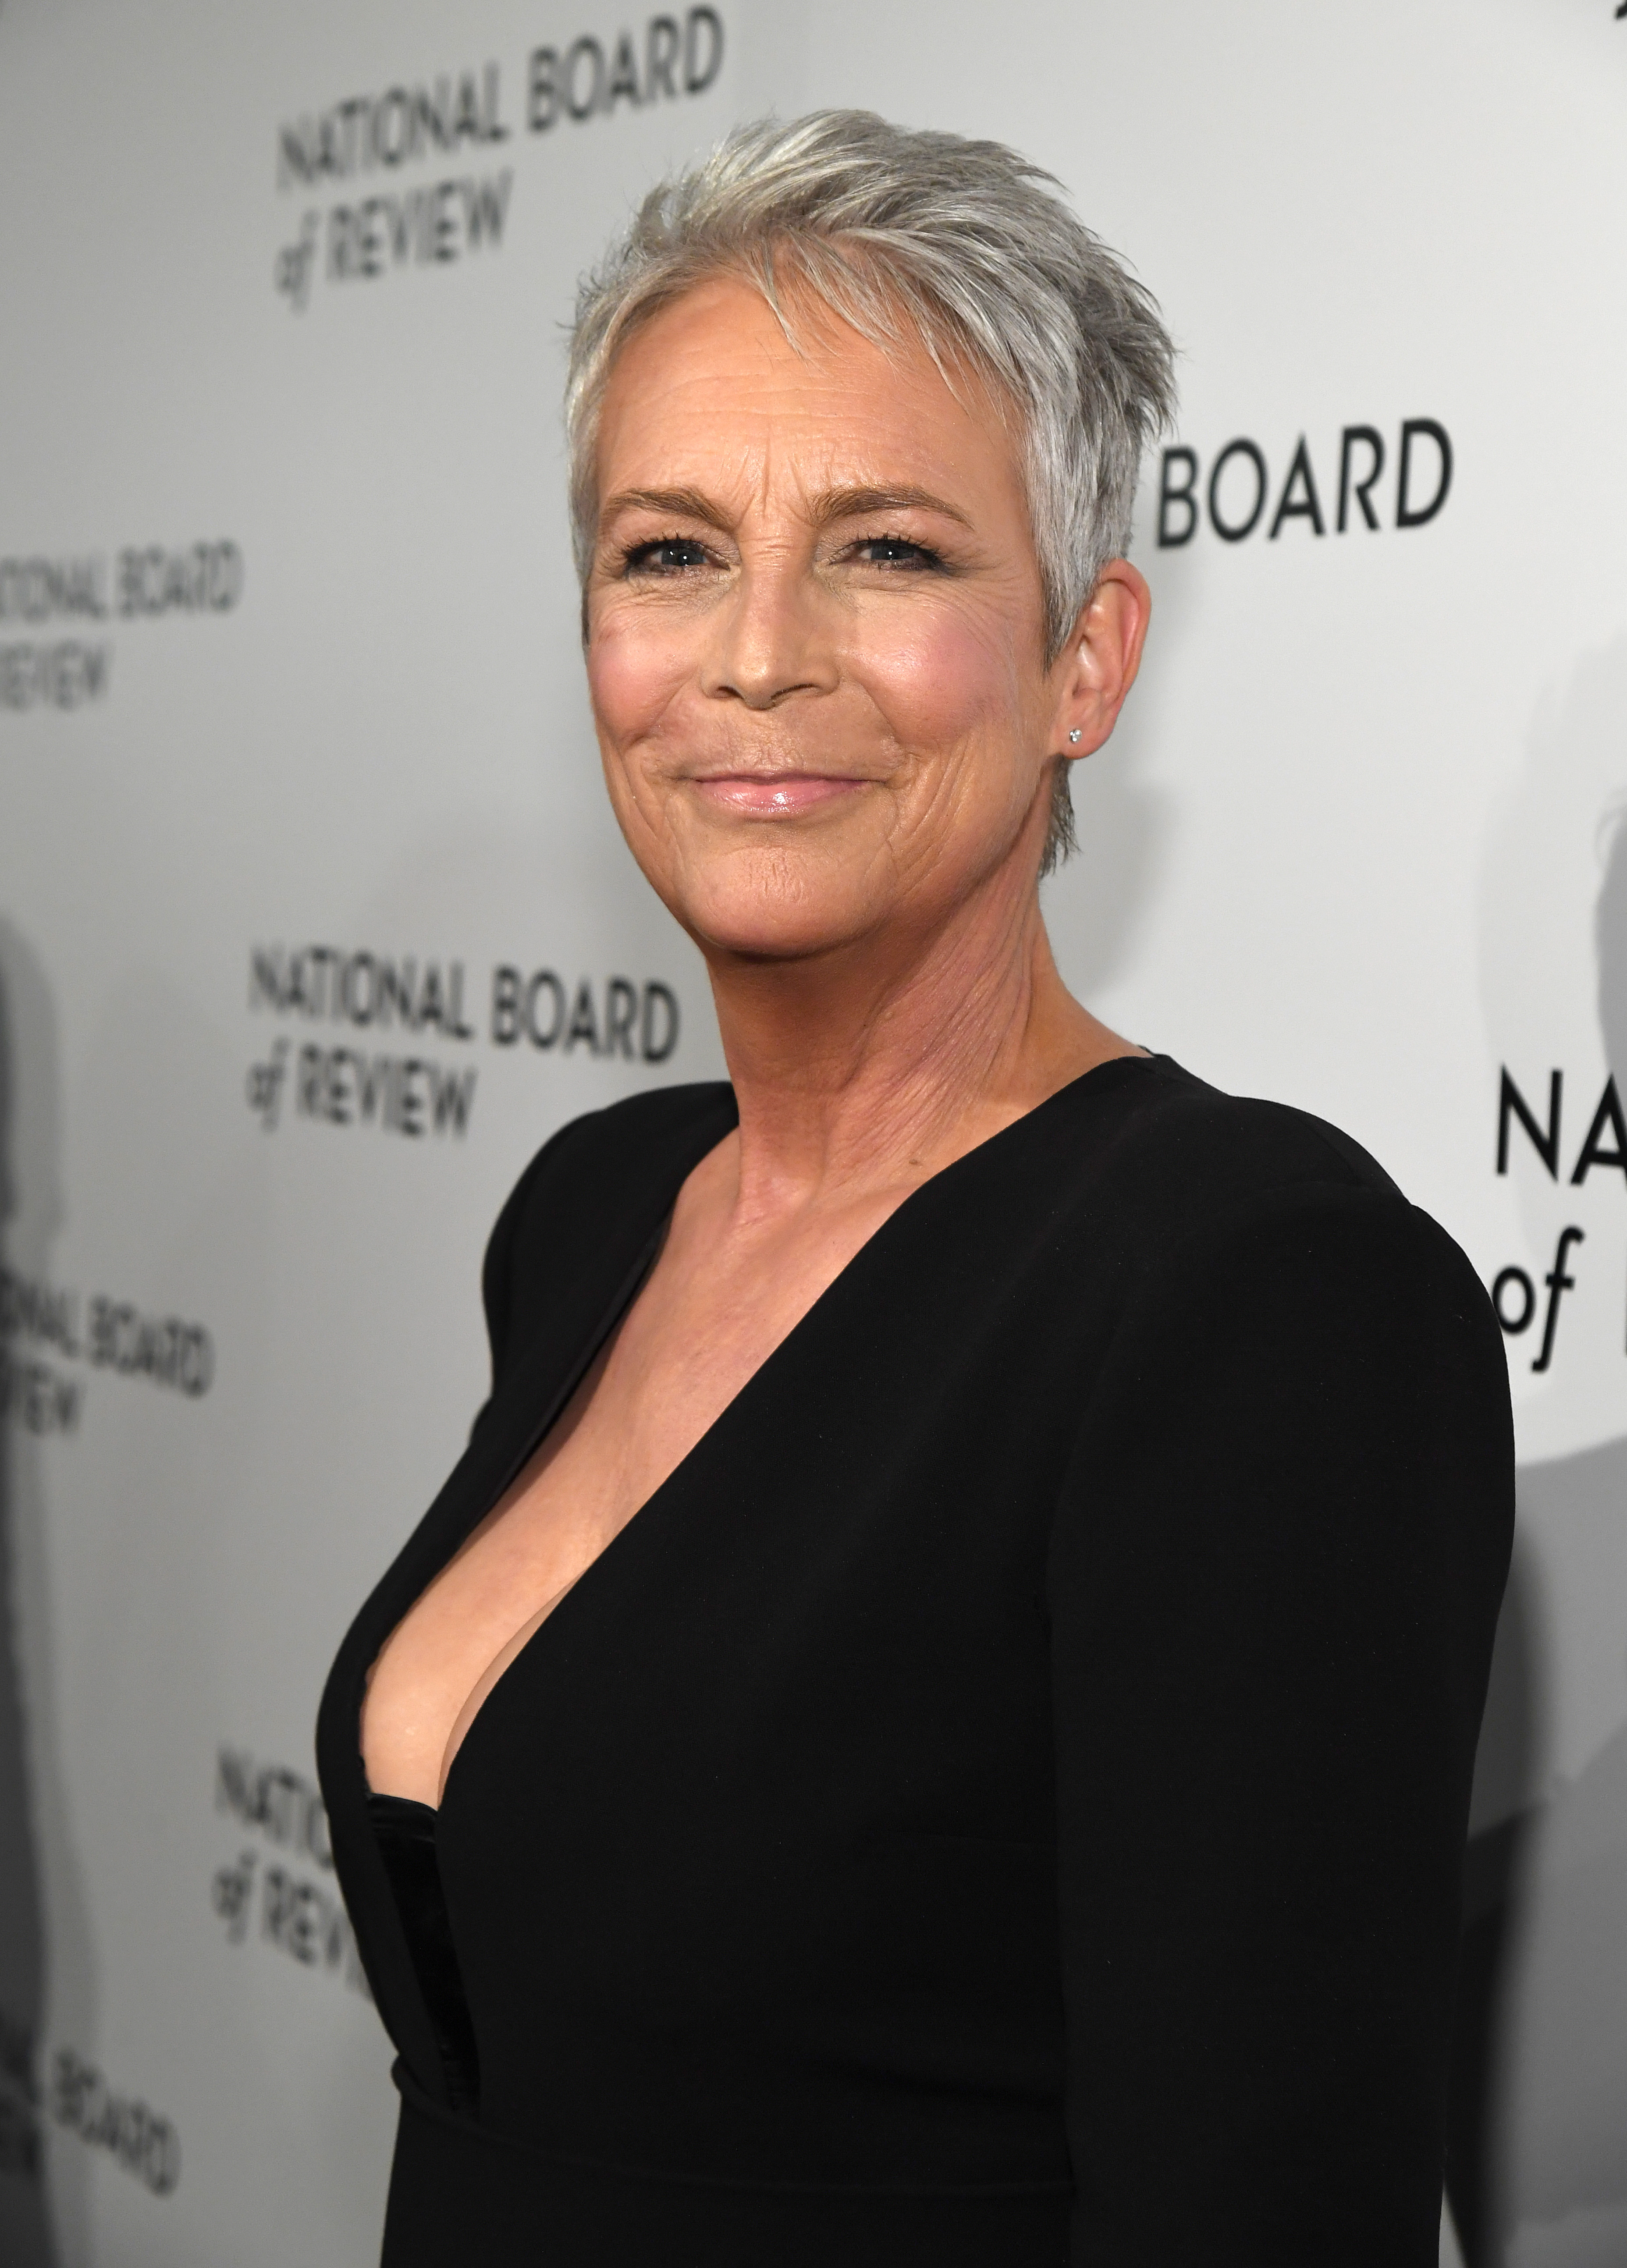 Jamie Lee Curtis on January 08, 2020 in New York City | Source: Getty Image